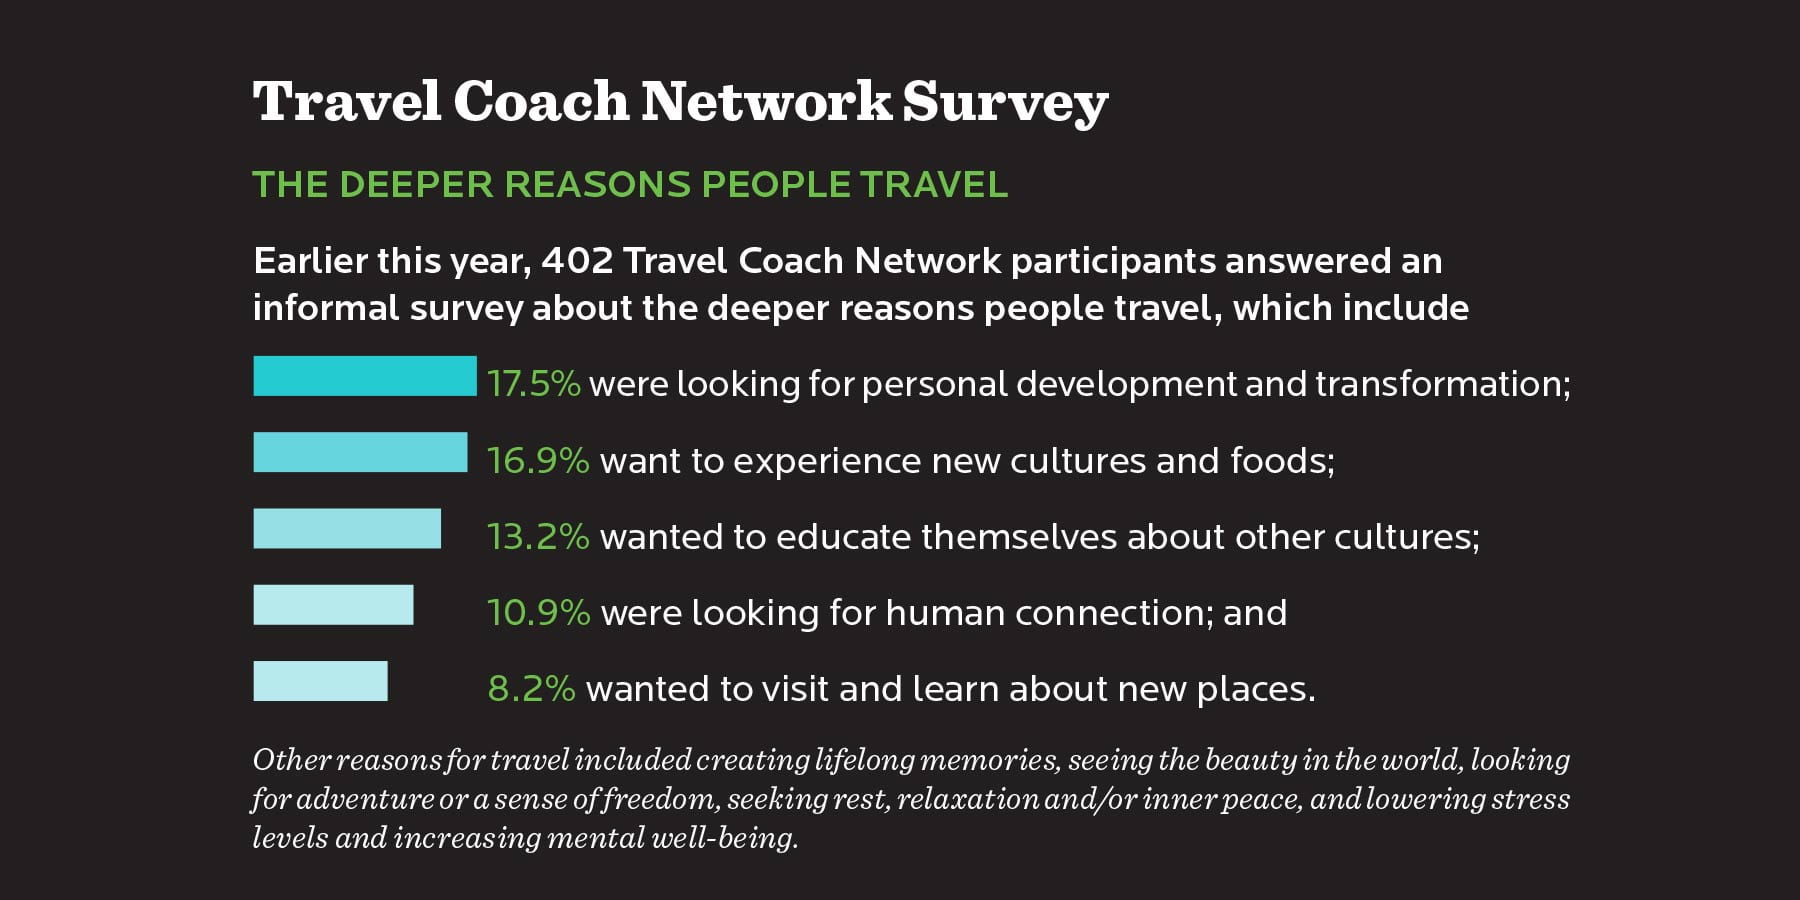 Travel Coach Network Survey THE DEEPER REASONS PEOPLE TRAVEL